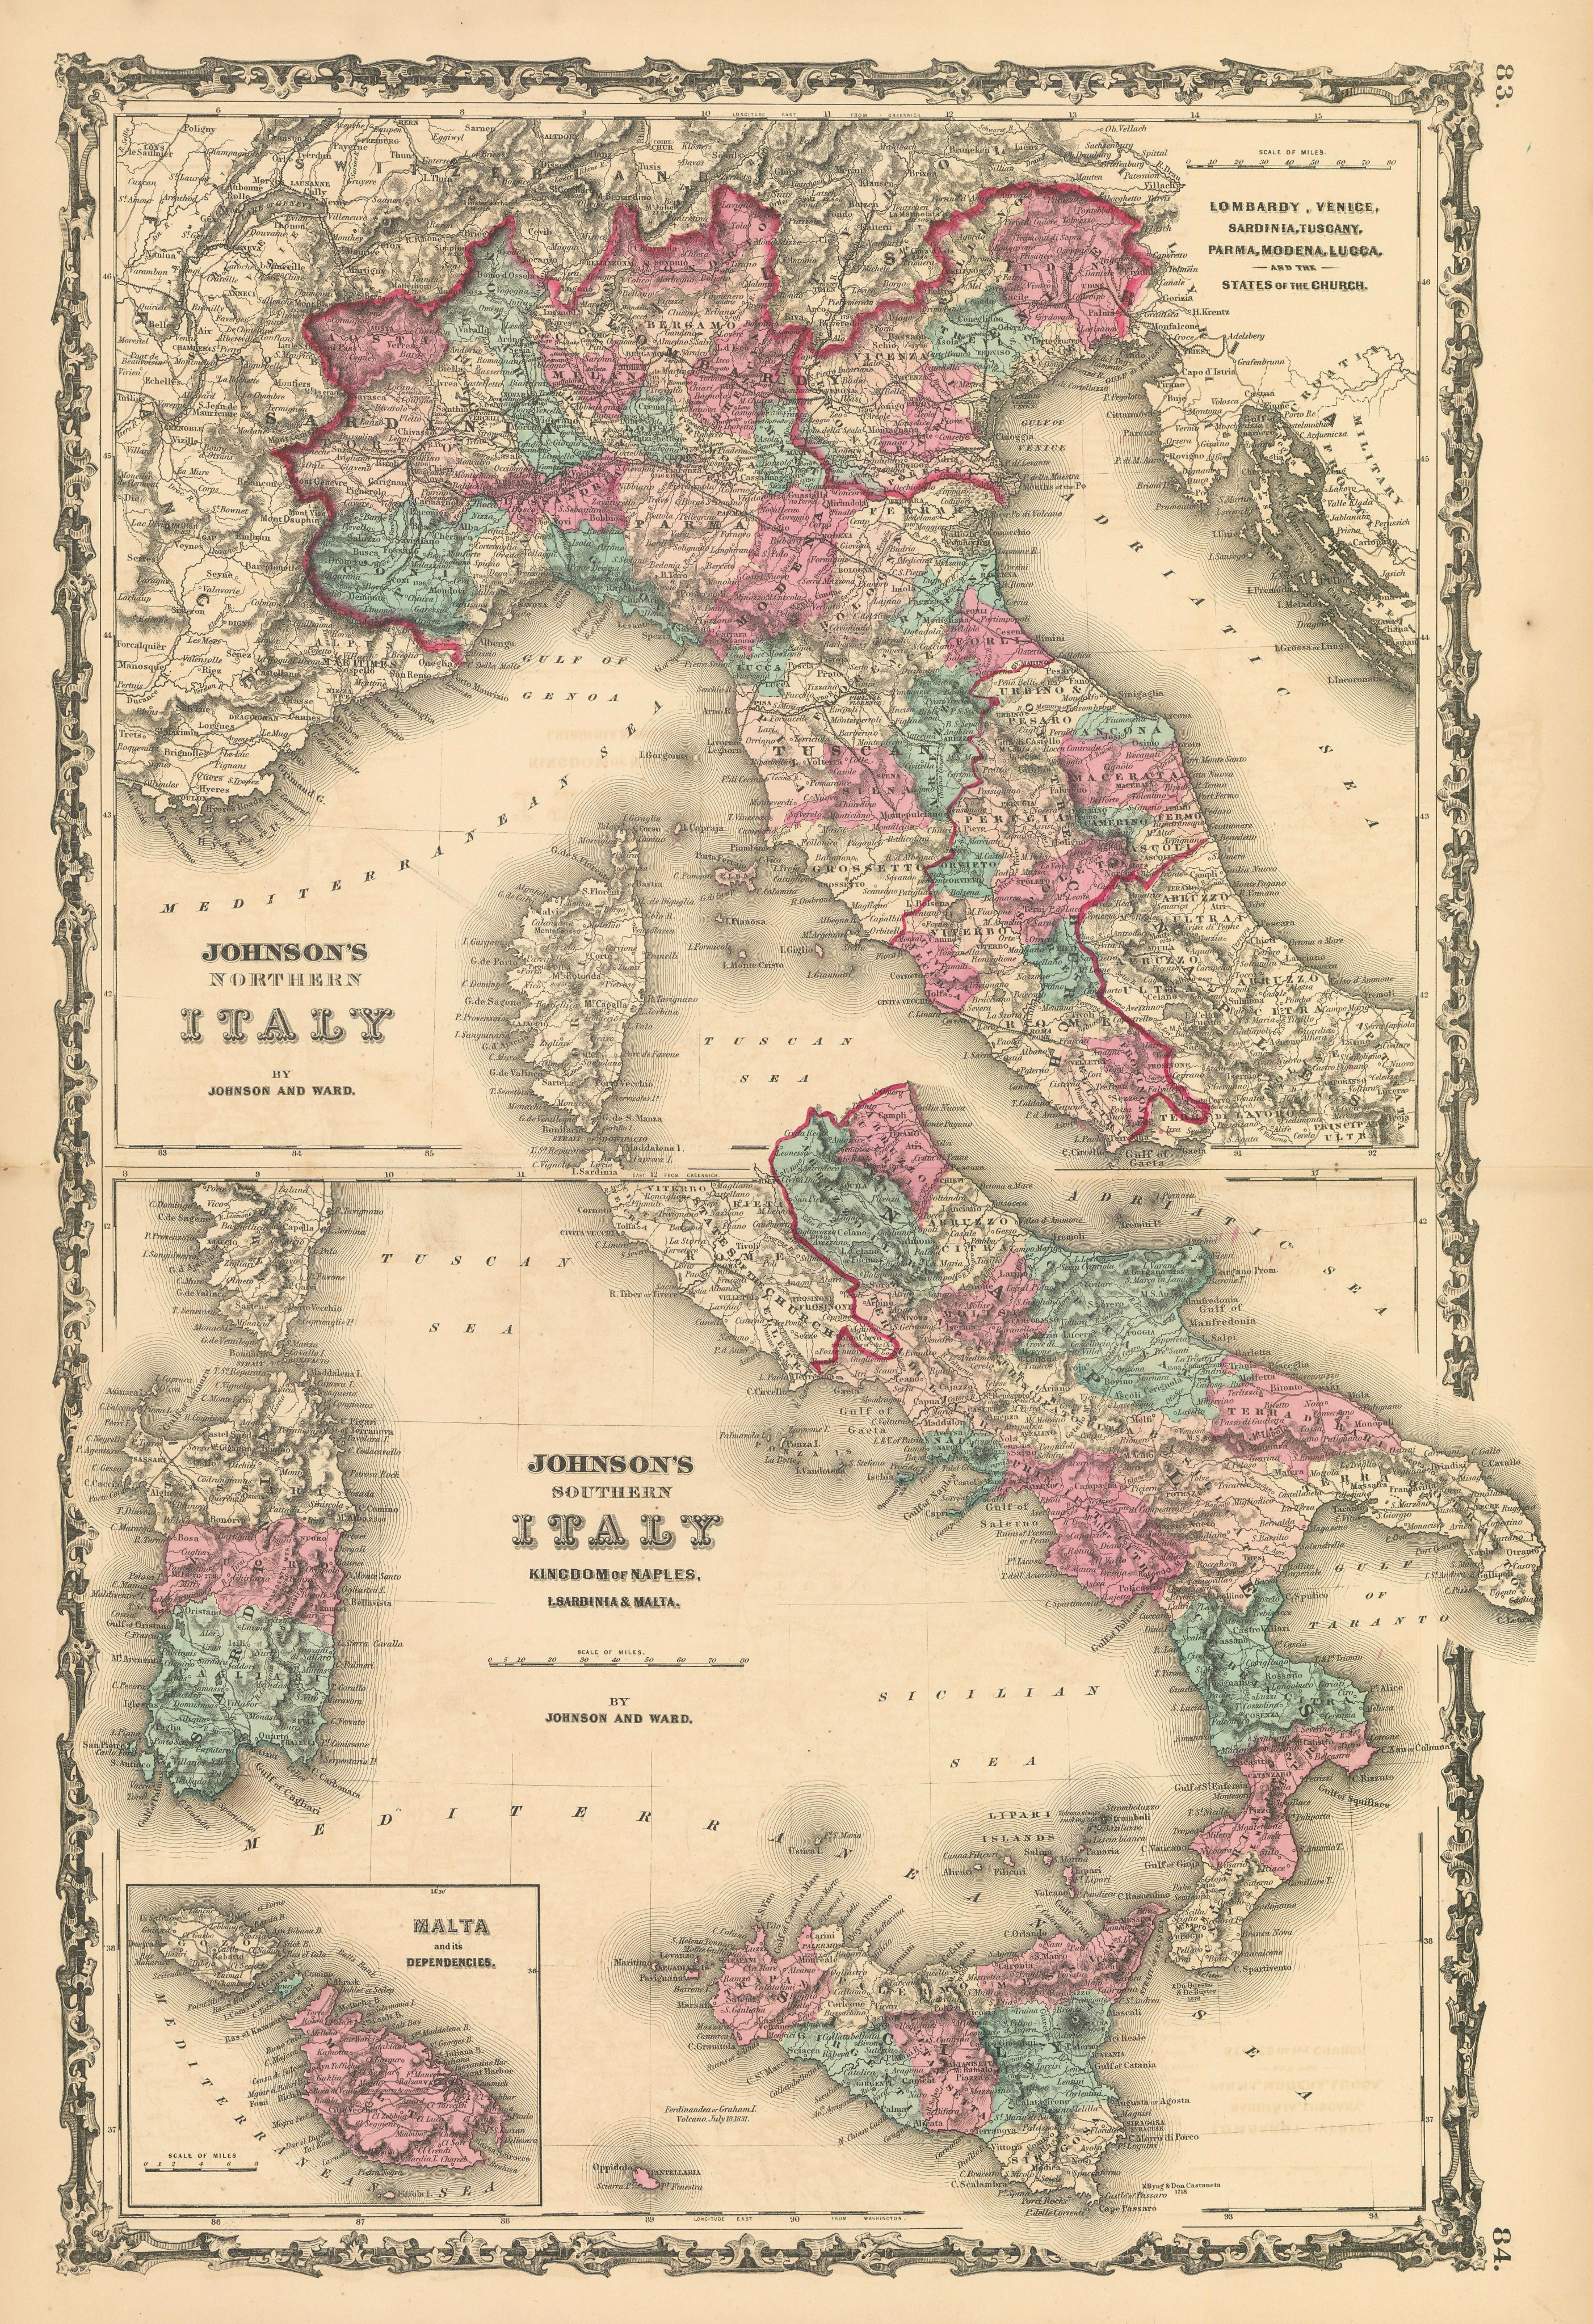 Associate Product Johnson's Northern & Southern Italy. Malta. Unusual juxtaposition 1862 old map